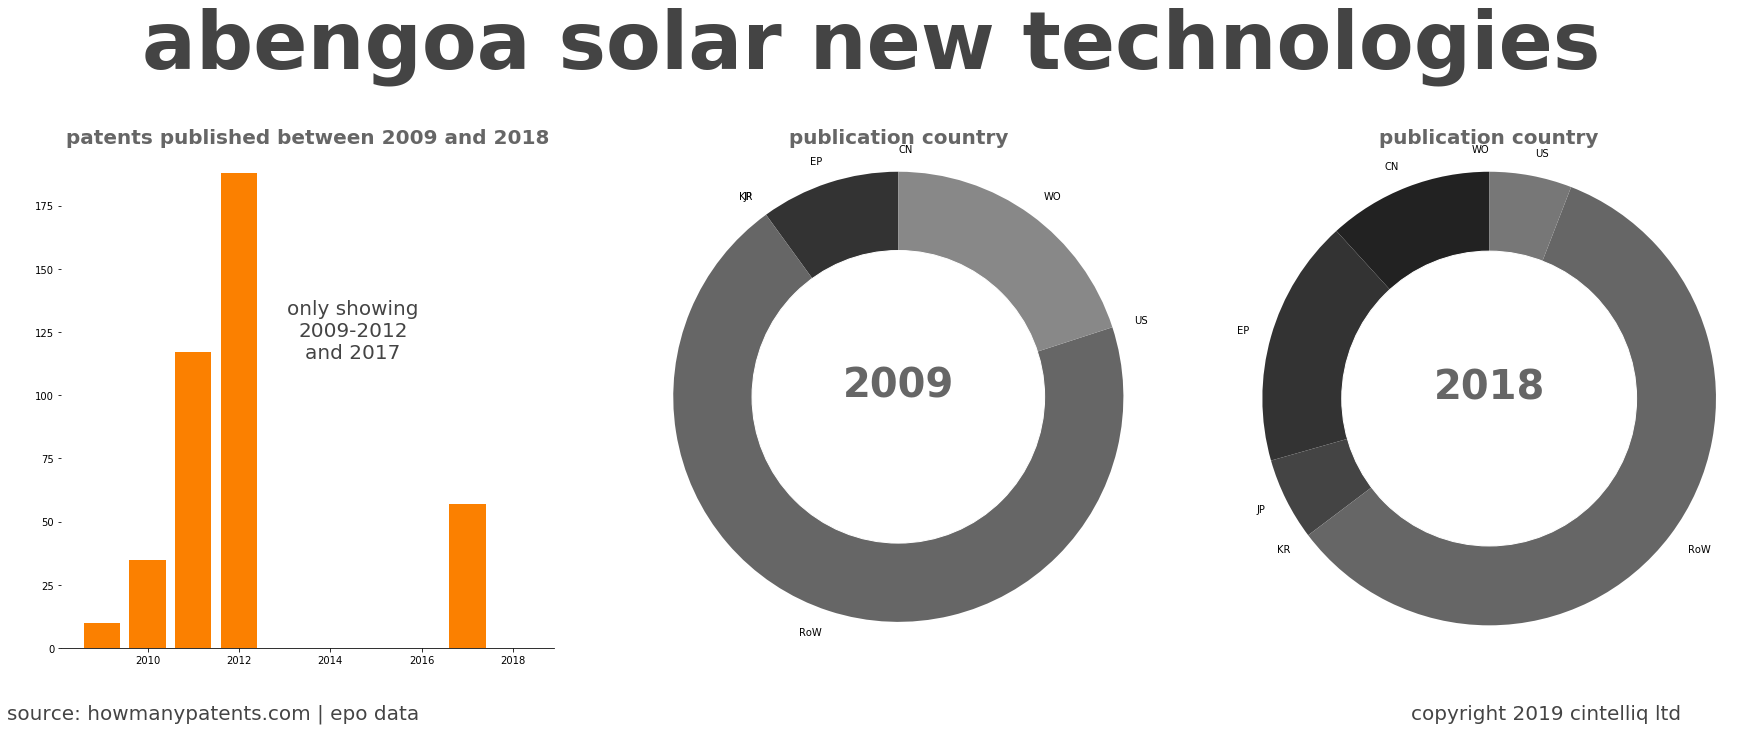 summary of patents for Abengoa Solar New Technologies